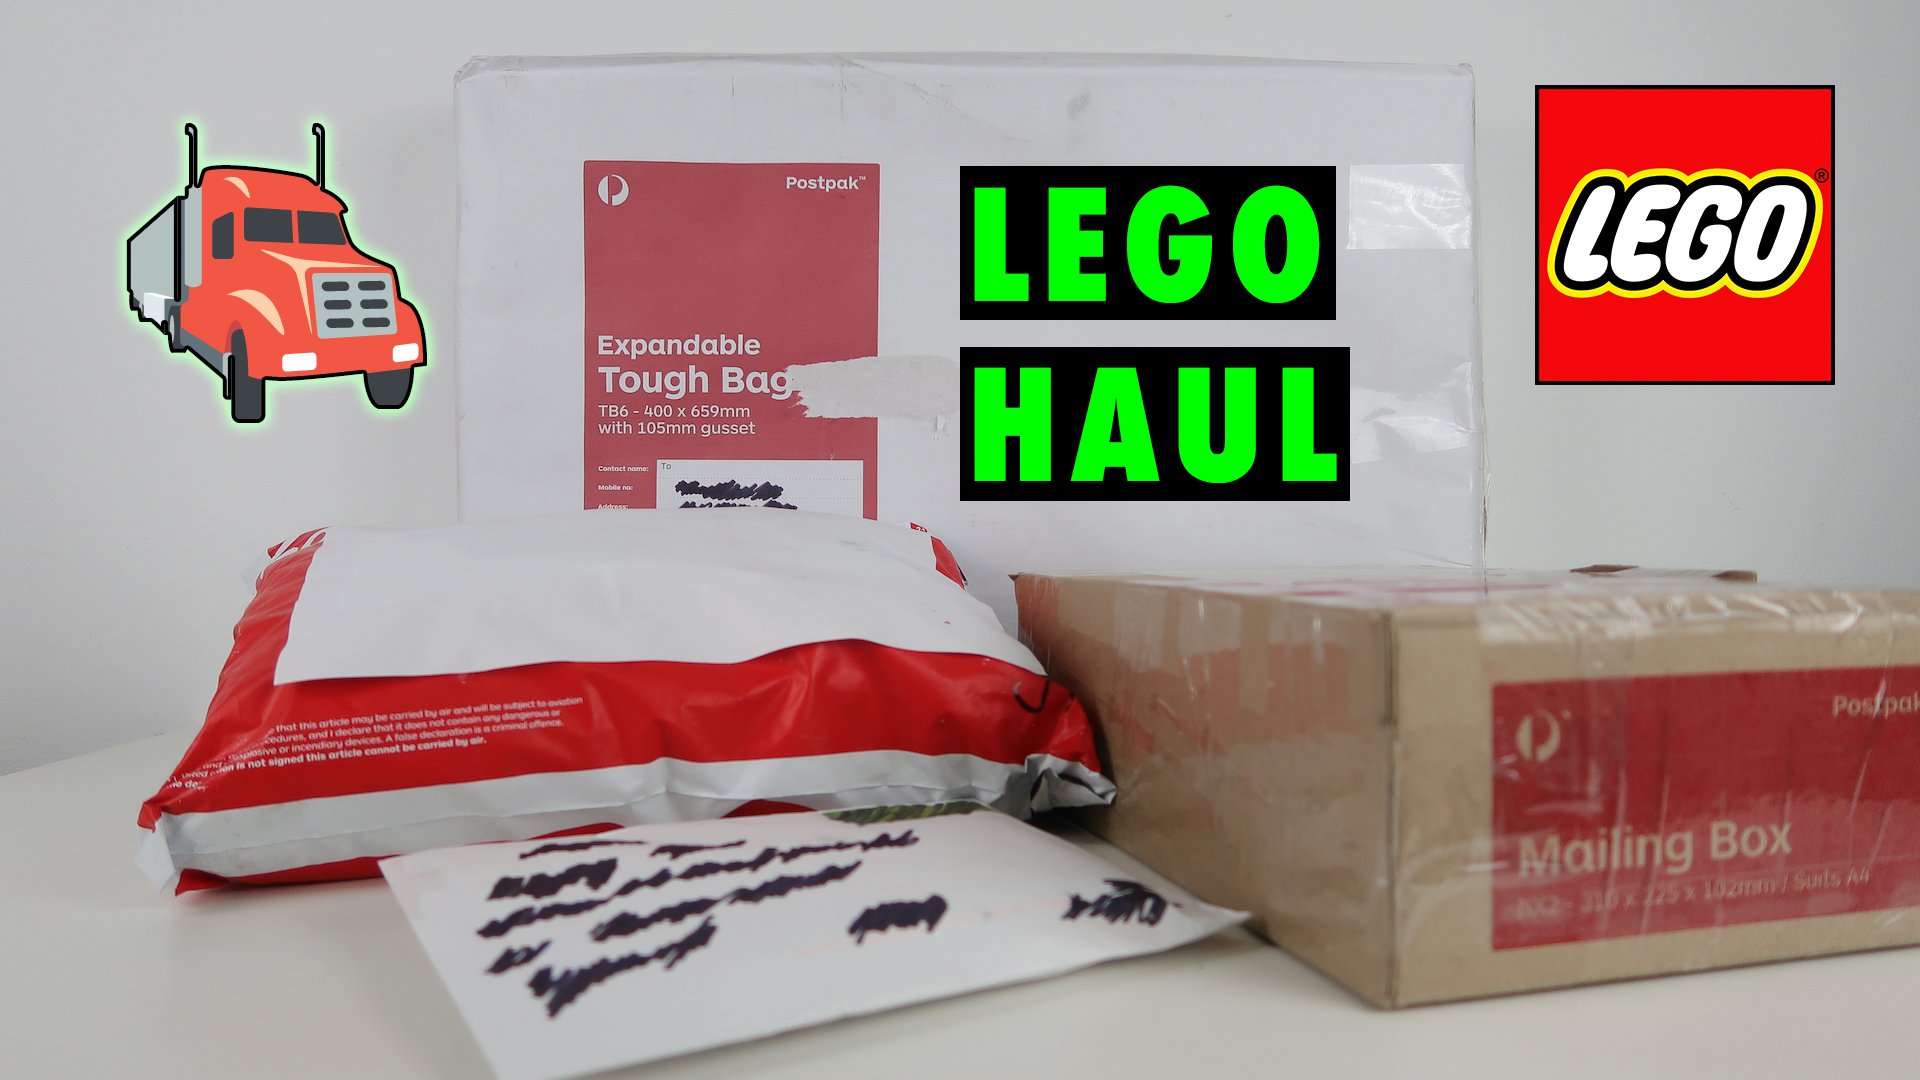 LEGO Haul #6 Video – 4 eBay Packages and a boat